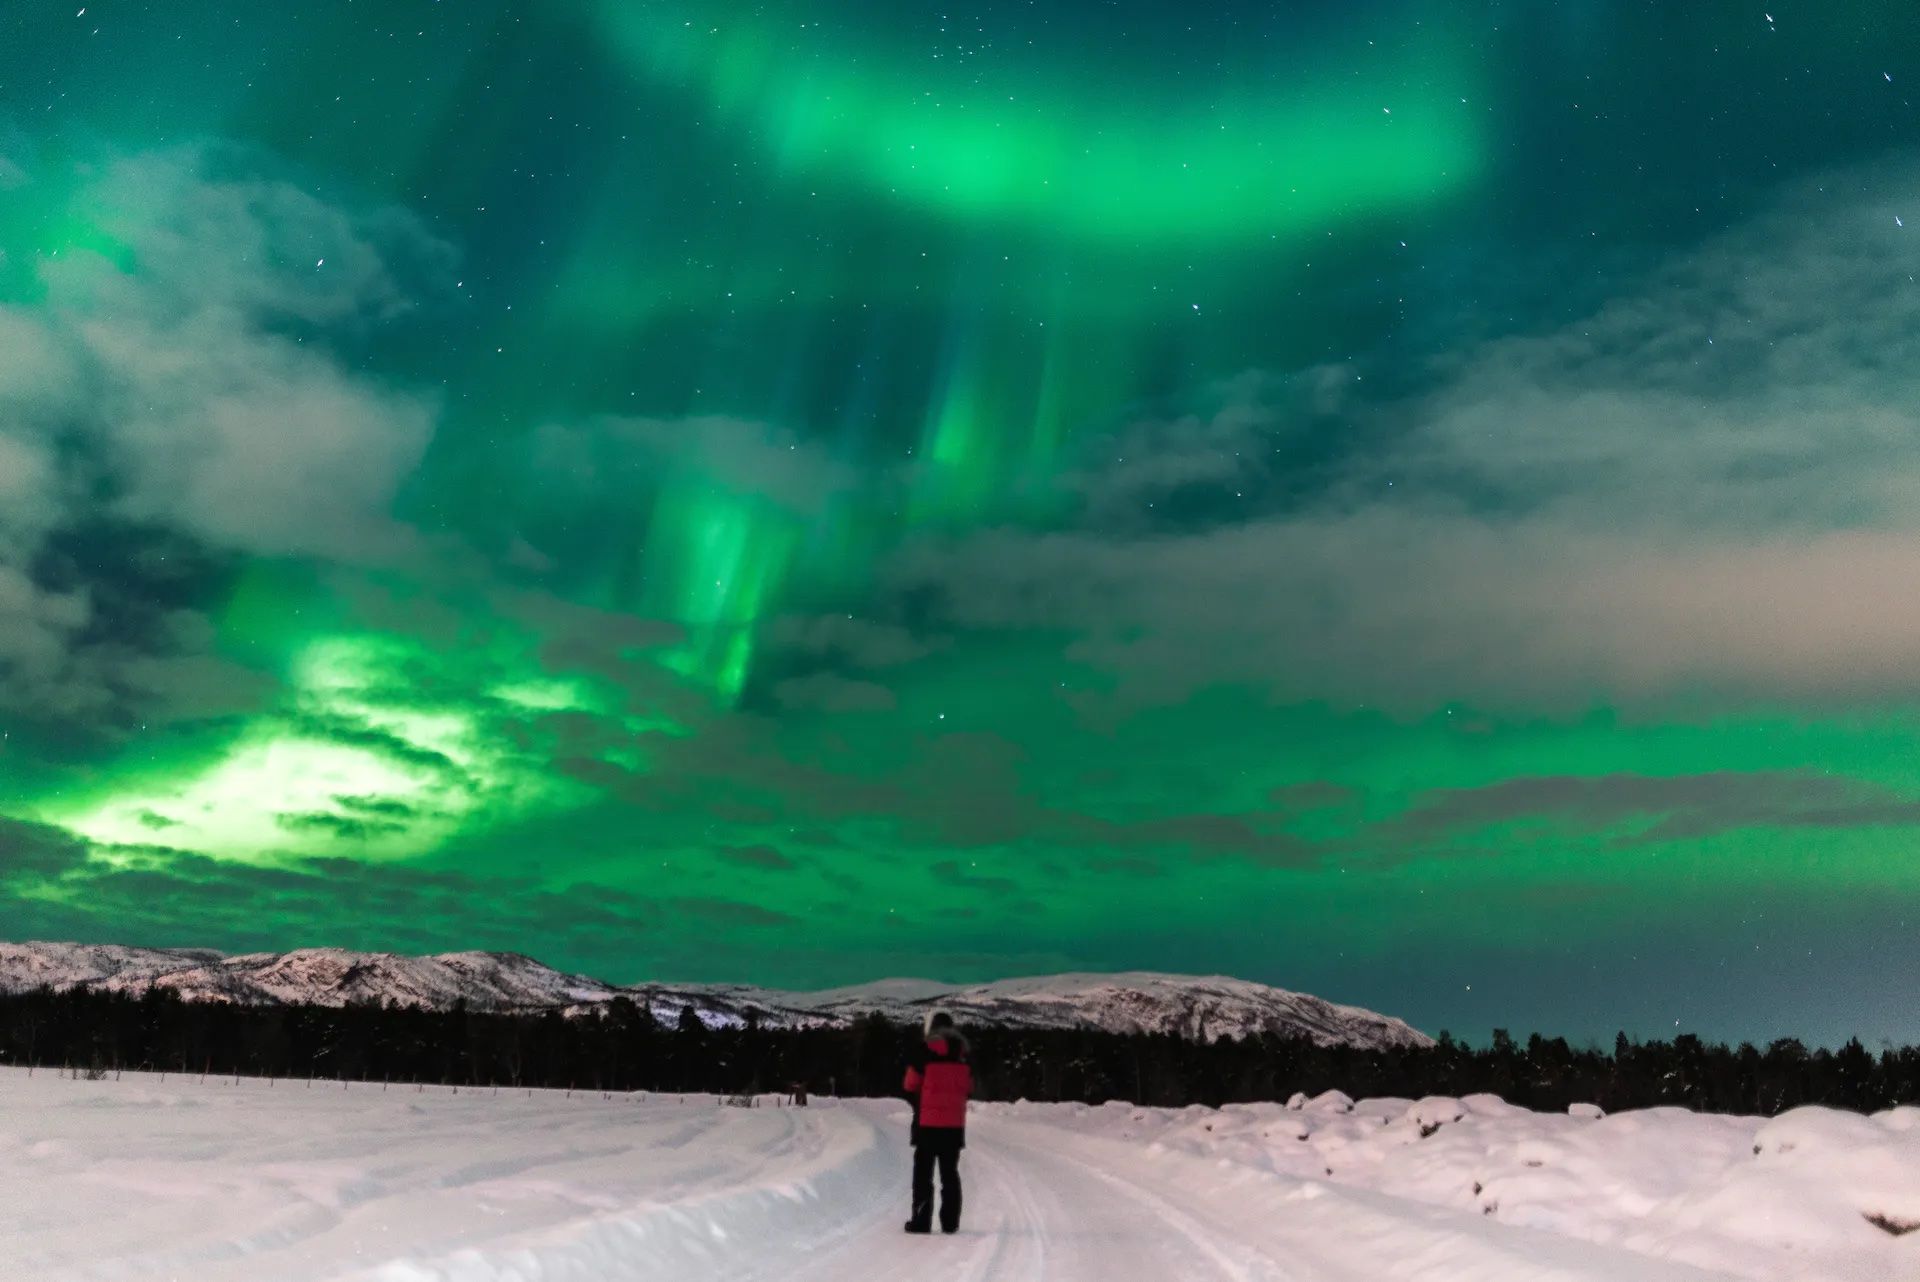 A hiker looks up at the northern lights while walking across a snowy landscape.